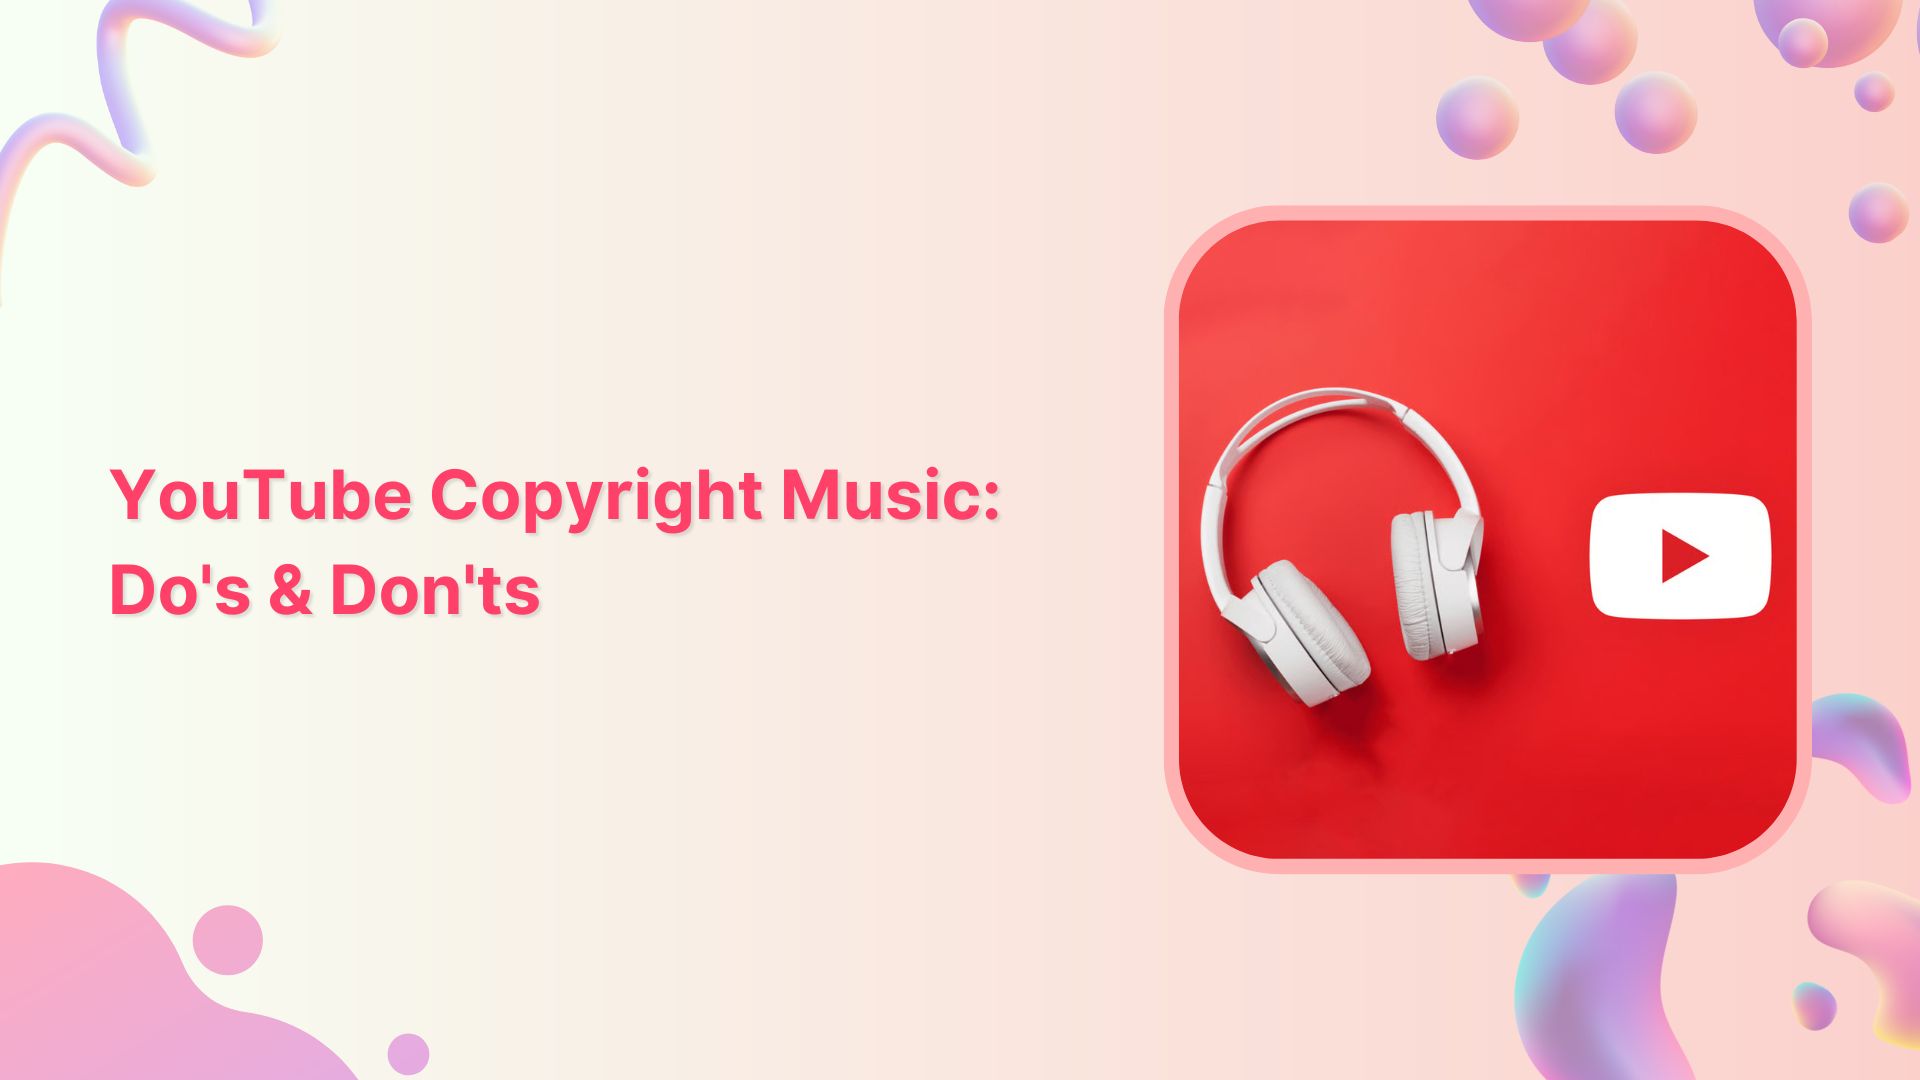 Do's and dont's of Youtube copyright music